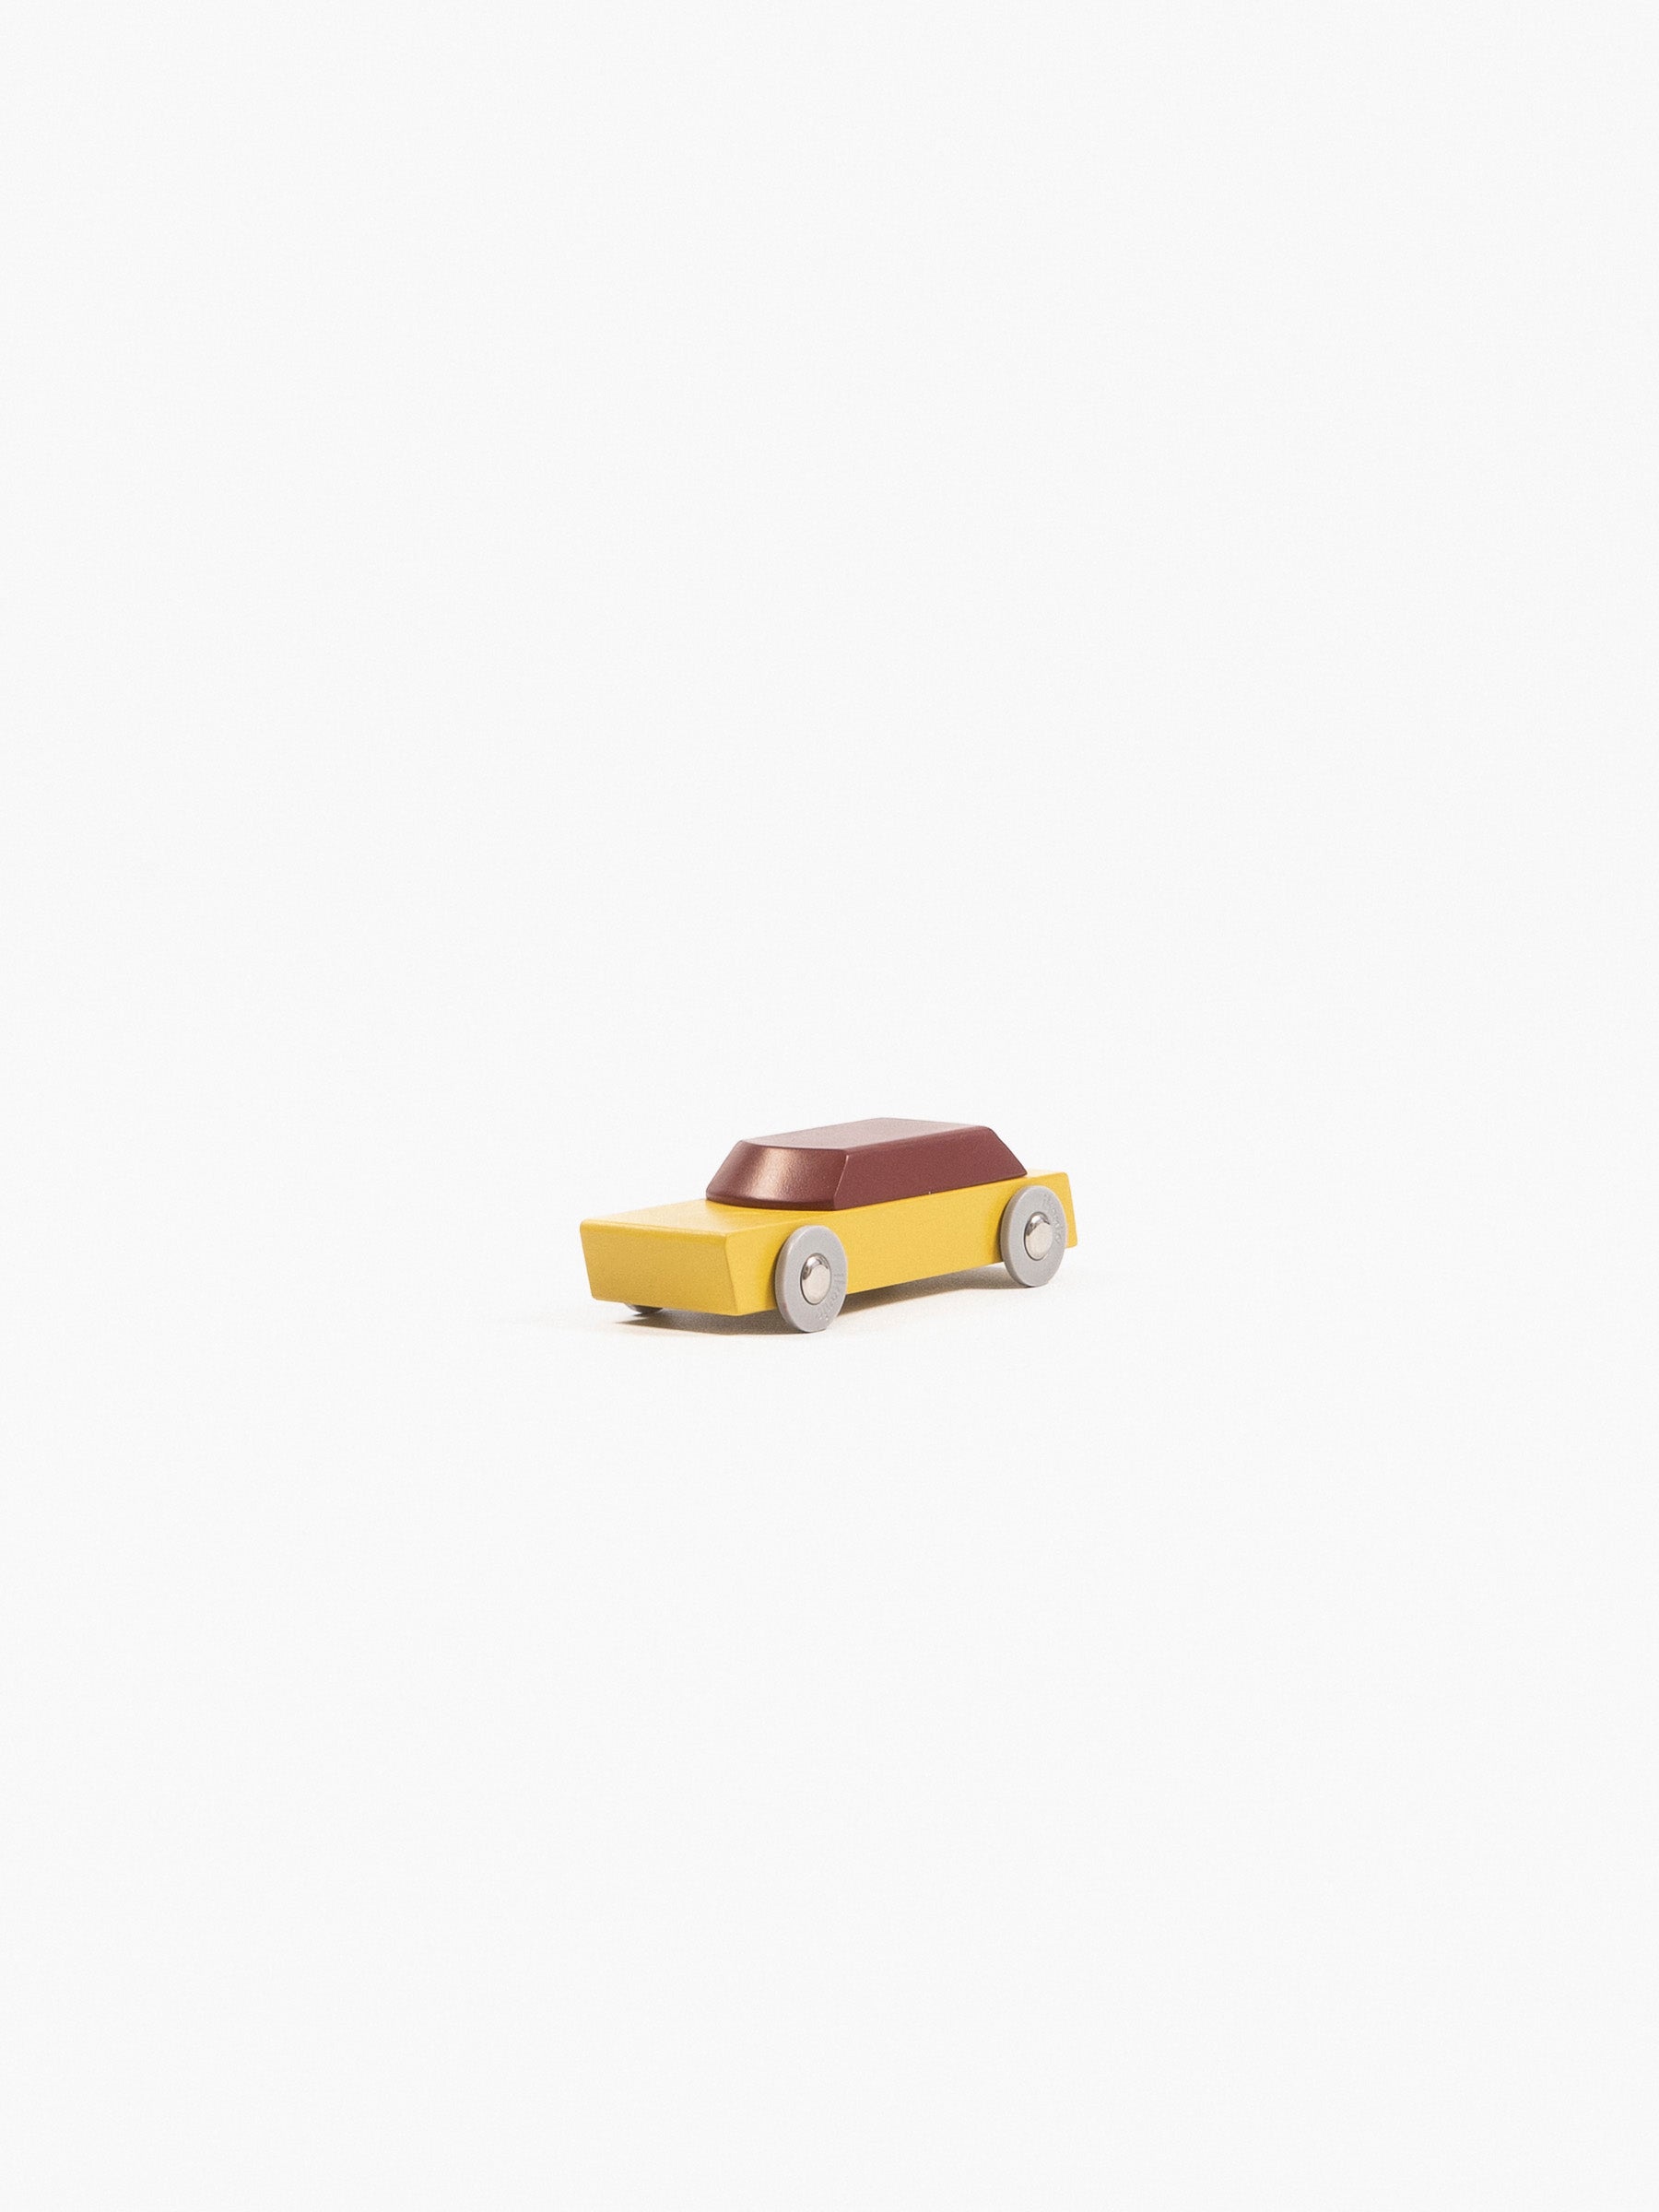 Floris Hovers Duotone Car 2 Yellow/Red